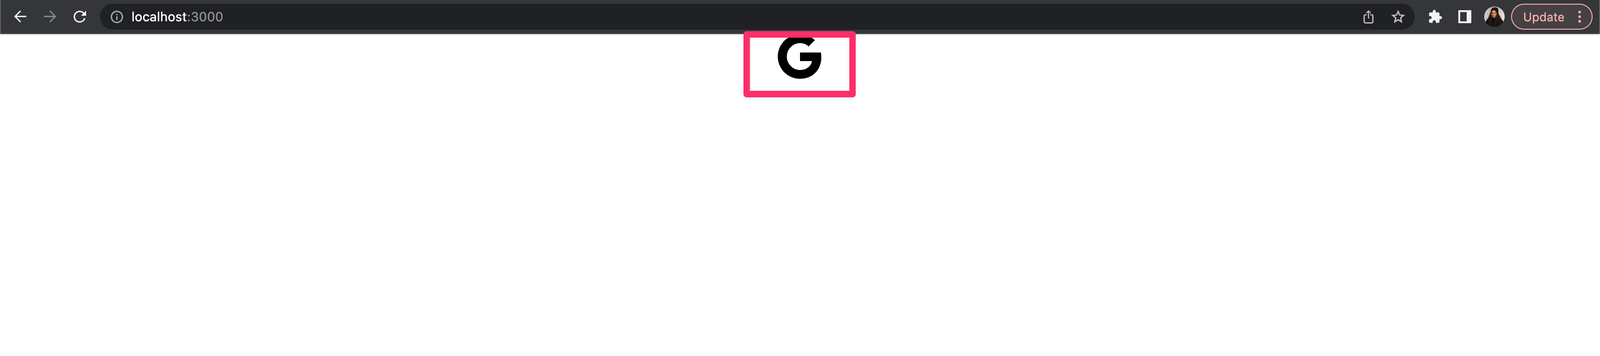 Using SVG with the image tag